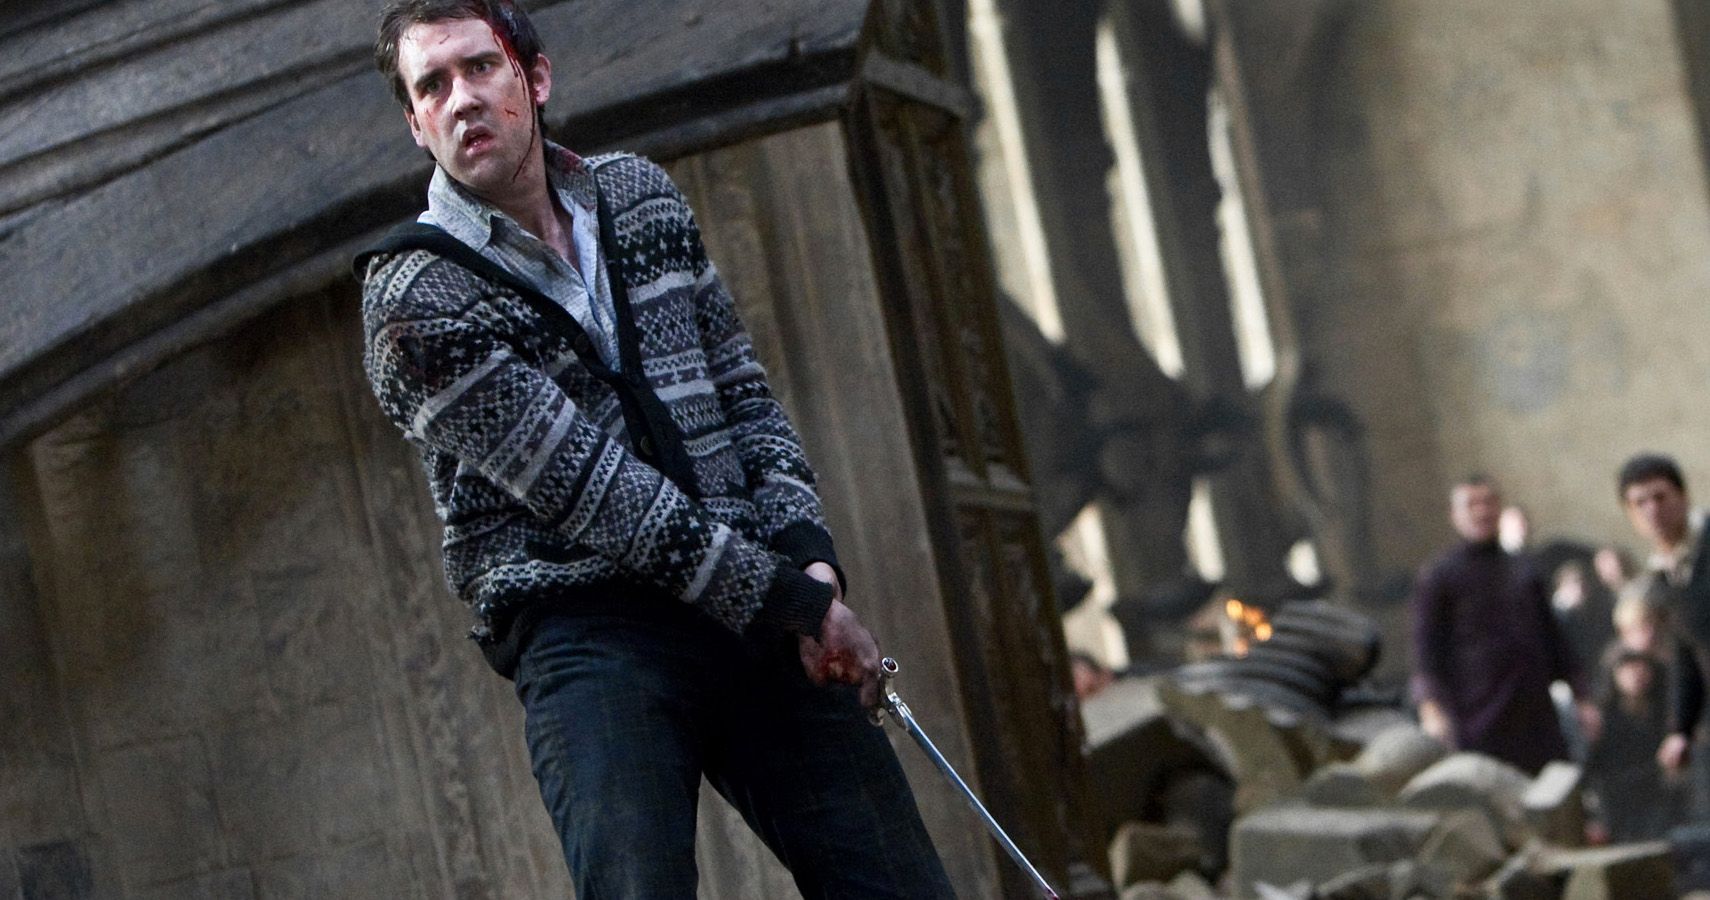 The Greatest Wizards And Witches In Harry Potter History (And How They Embody Their Hogwarts Houses)